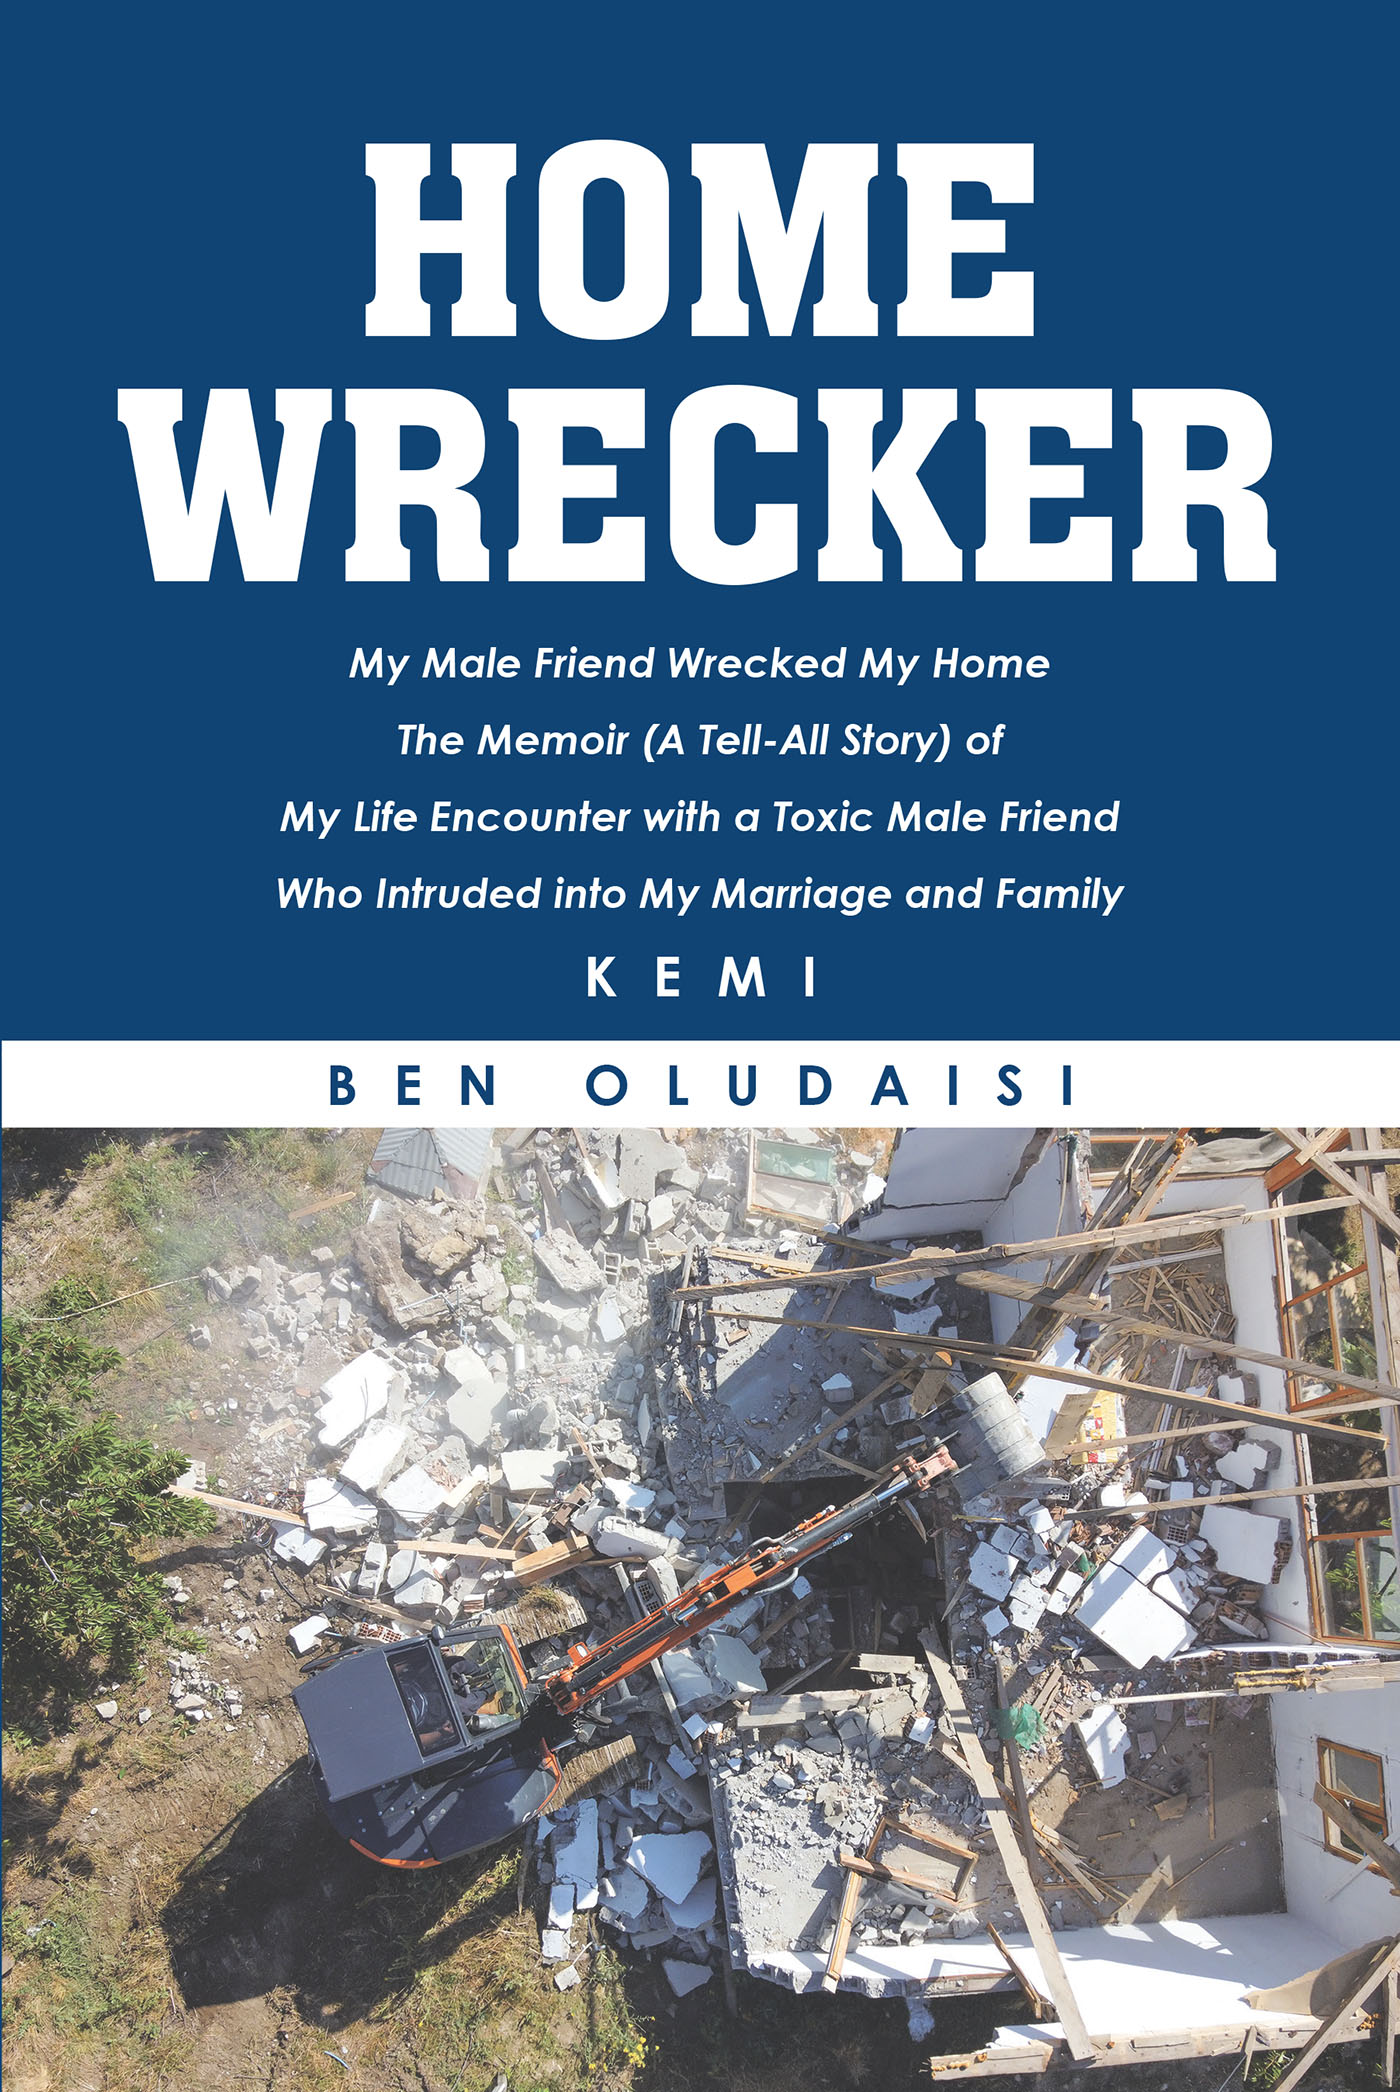 Author Ben Oludaisi’s New Book, "Home Wrecker," is a Candid True Story Recalling One Family’s Victimization by a Self-Serving Interloper Masquerading as a Lifelong Friend